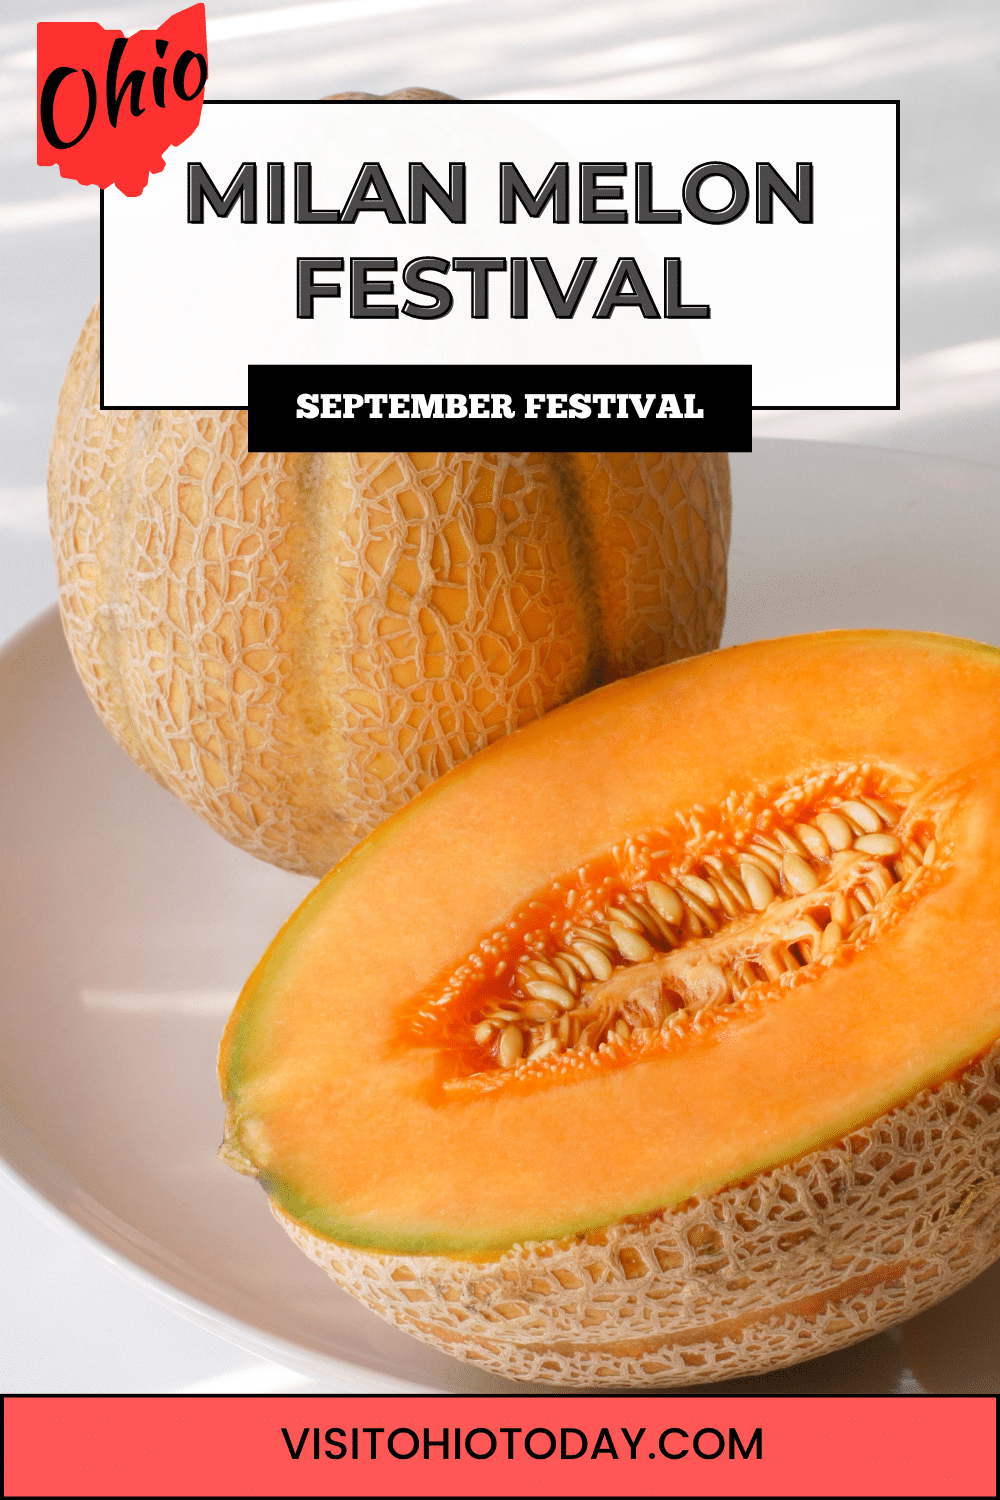 The Milan Melon Festival, an annual event held on Labor Day weekend in September, has been a tradition since 1958. This three-day celebration honors the abundant and flavorful muskmelons that are at their ripest at this time.